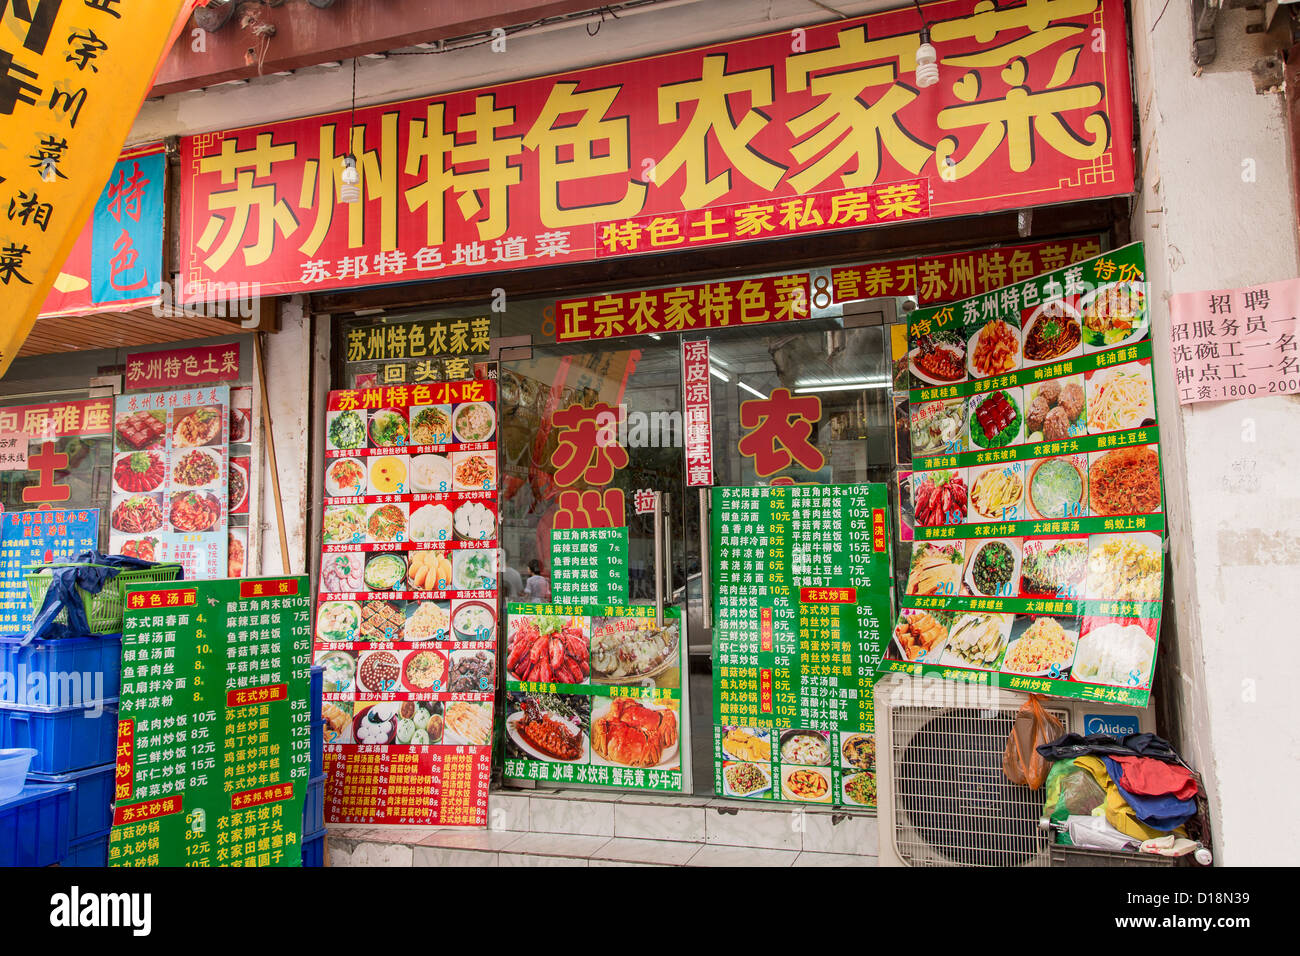 Chinese restaurant decorated with signs in Suzhou, China. Stock Photo